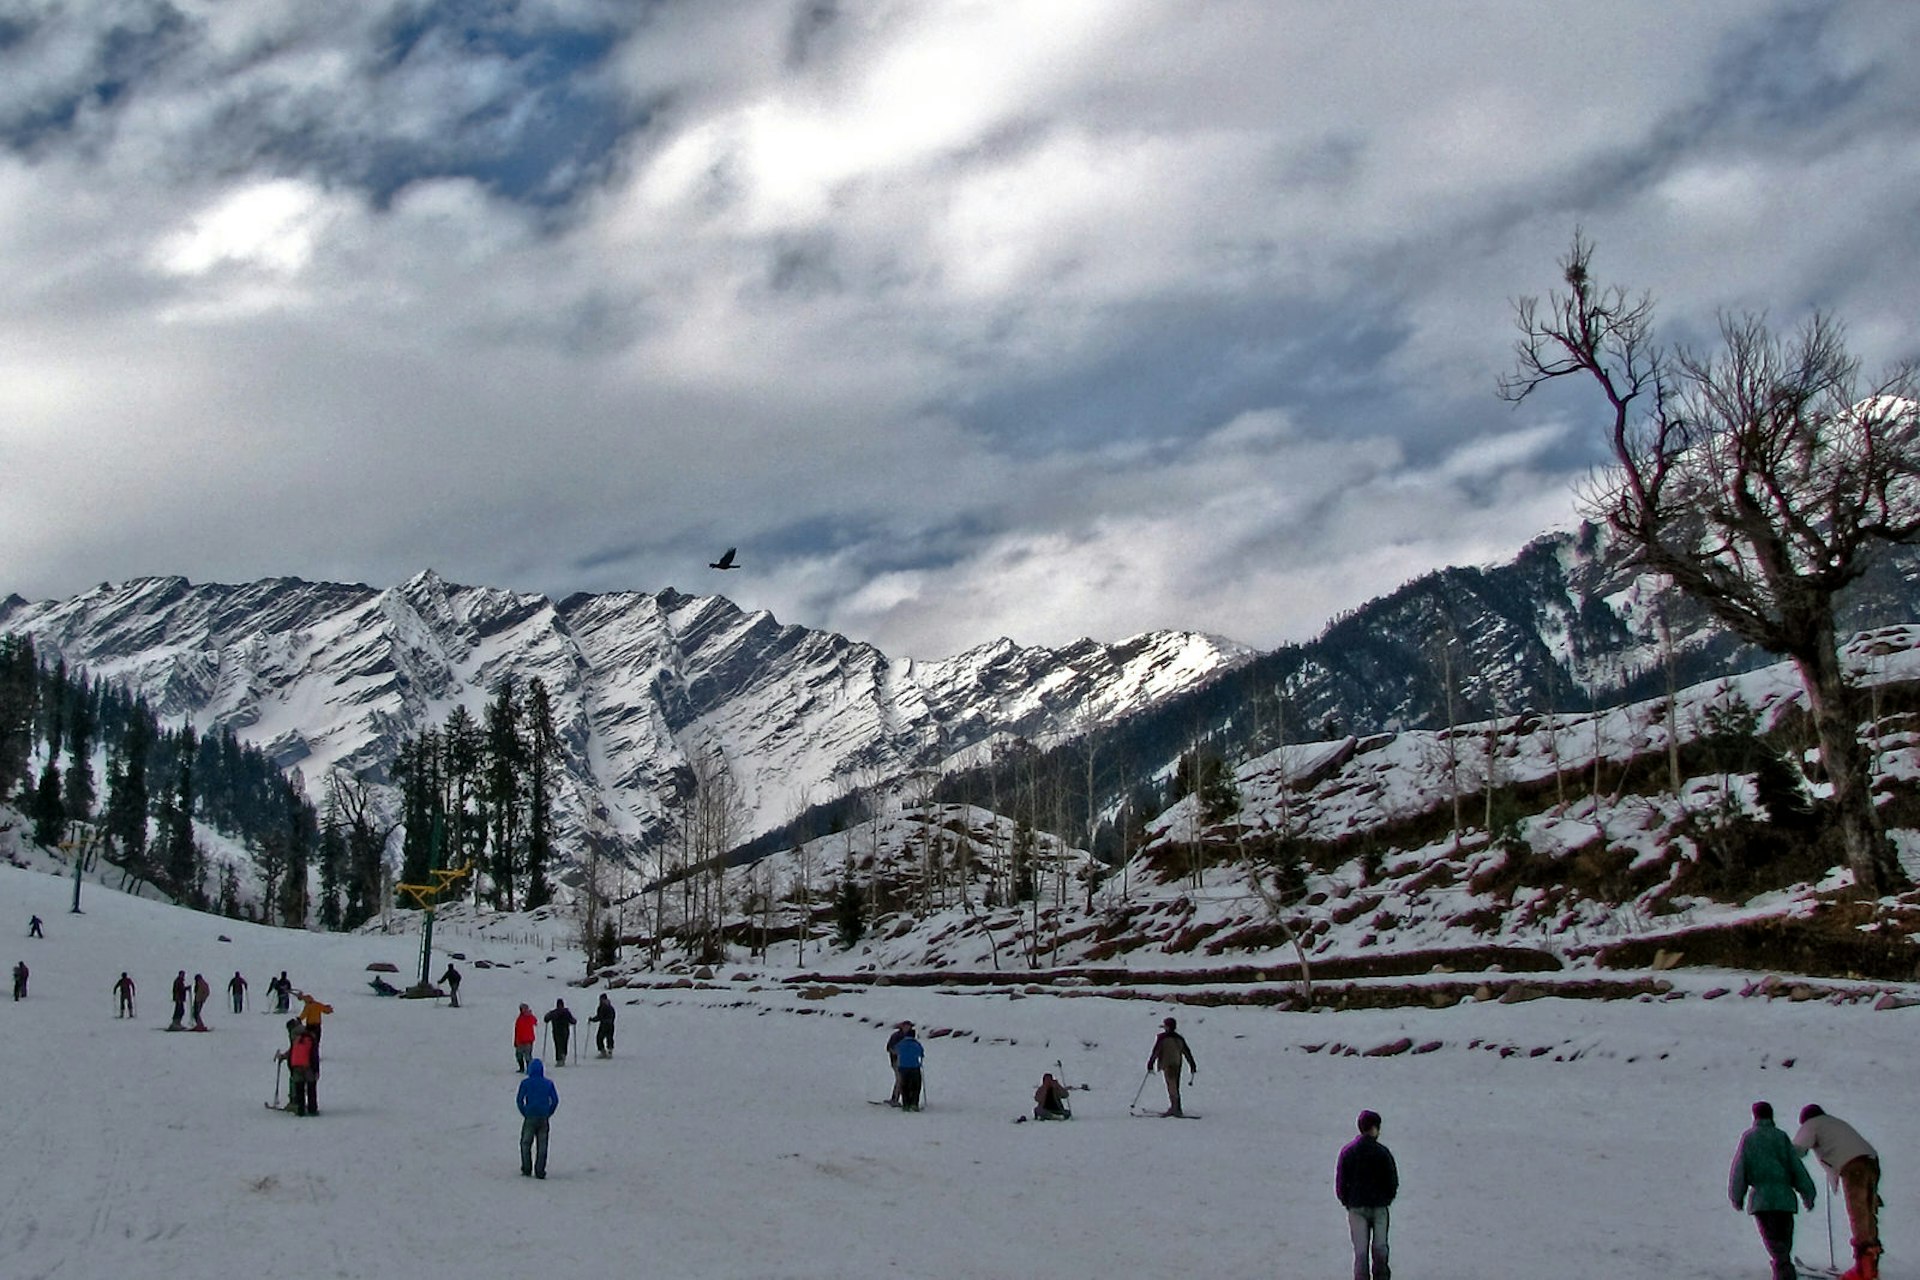 A group of skiers at the bottom of a snow-covered valley in Himachal Pradesh